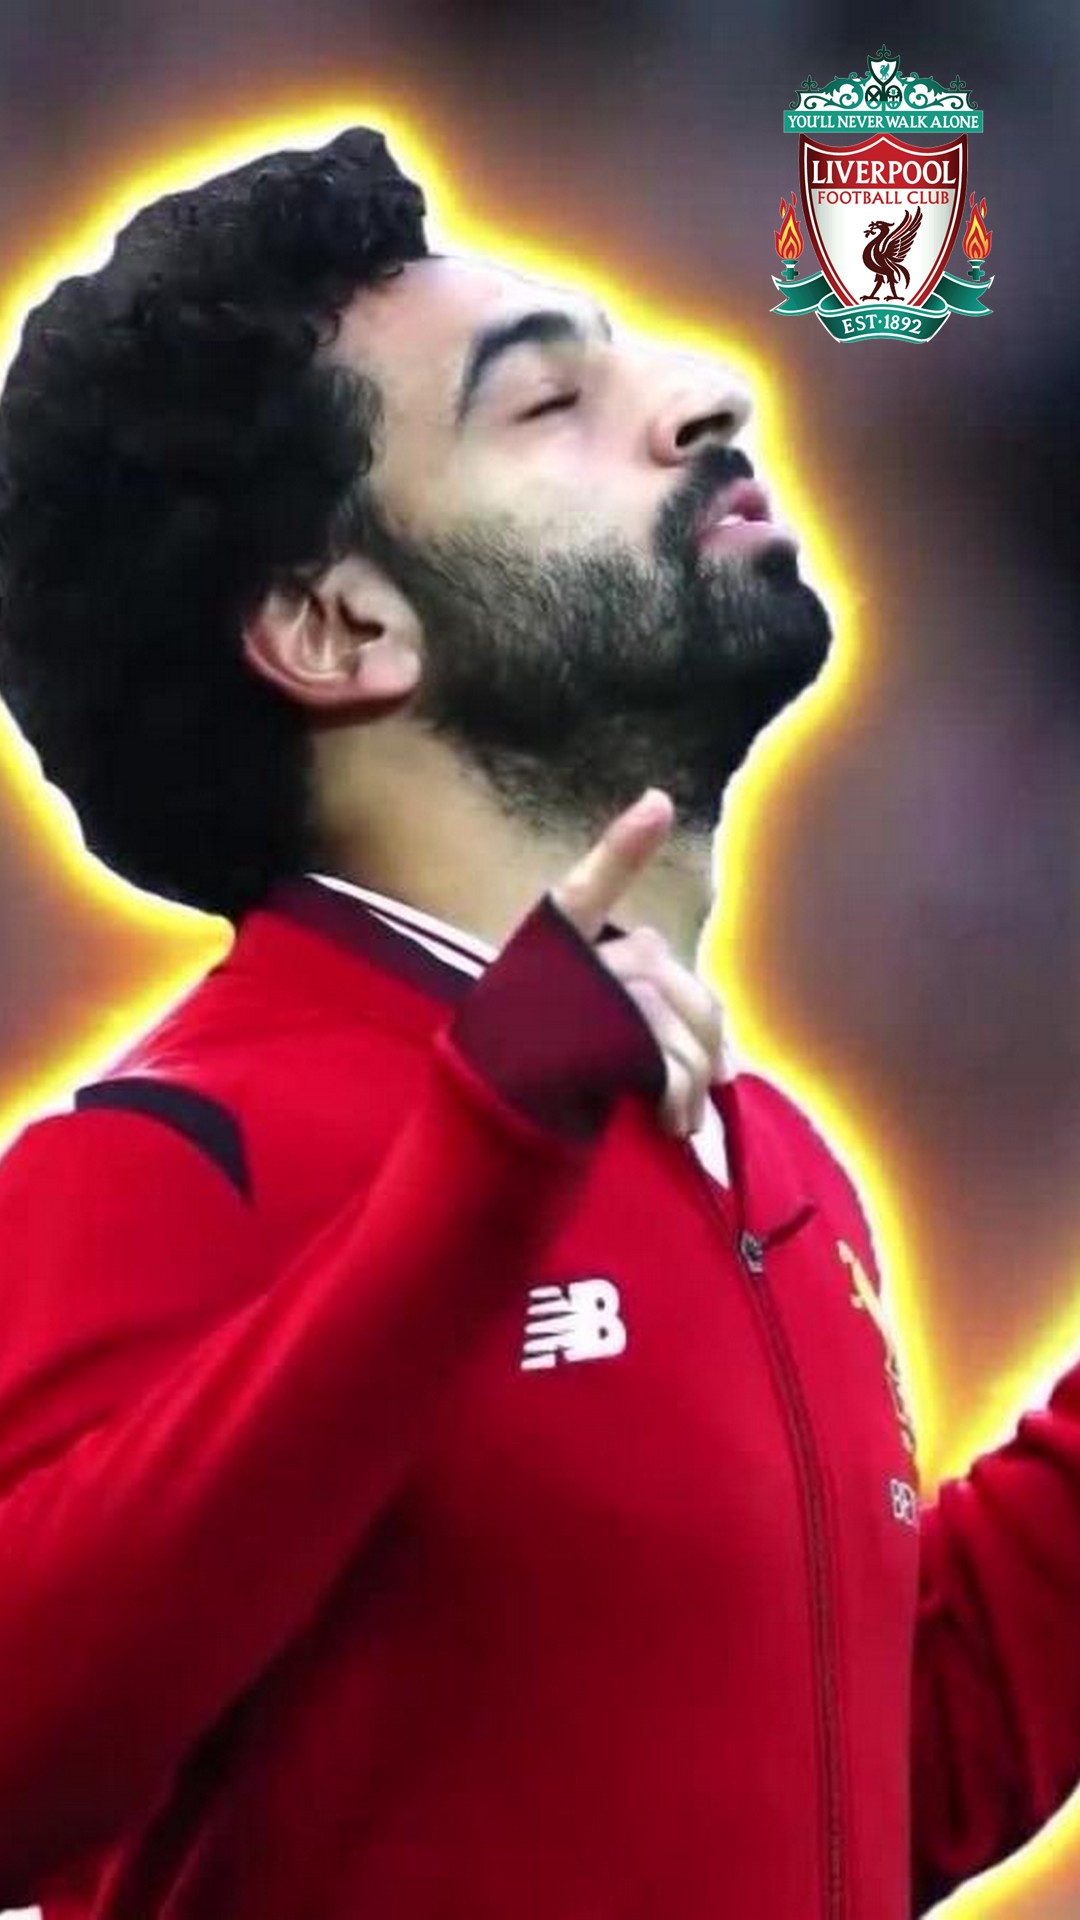 Wallpaper Mohamed Salah iPhone with image resolution 1080x1920 pixel. You can make this wallpaper for your iPhone 5, 6, 7, 8, X backgrounds, Mobile Screensaver, or iPad Lock Screen